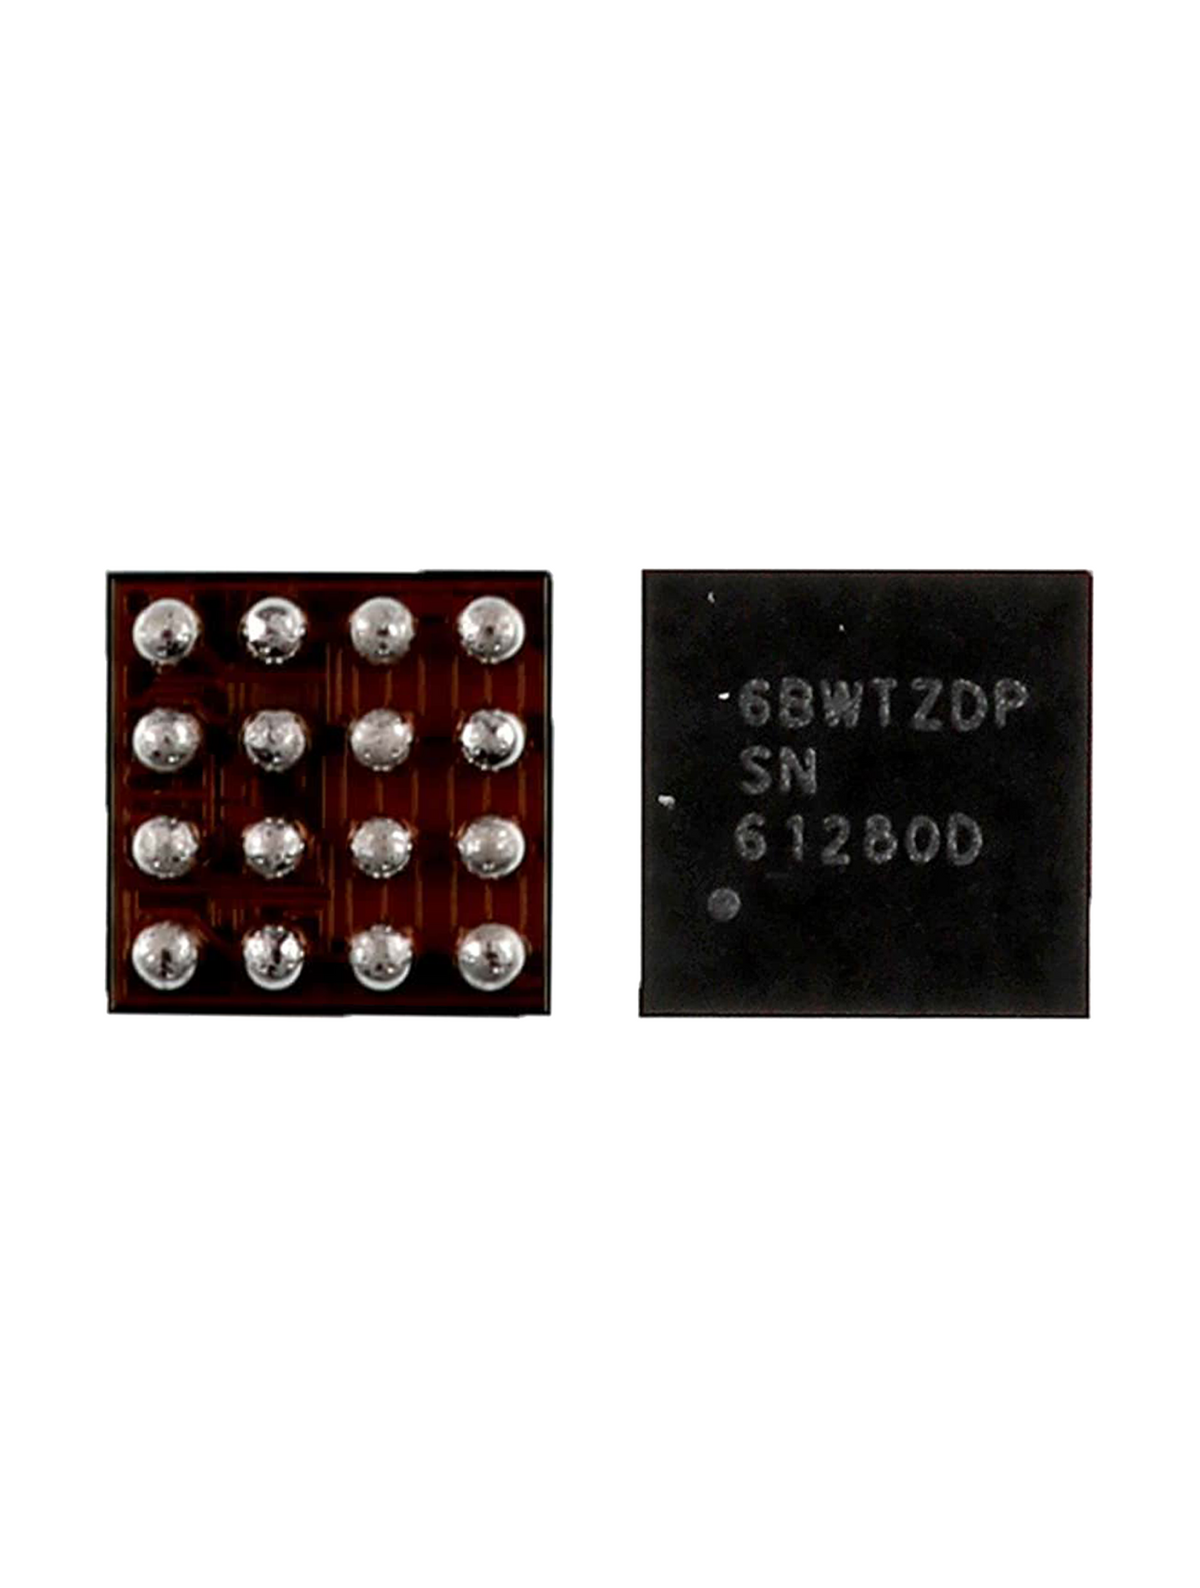 CAMERA / BOOST POWER SUPPLY IC COMPATIBLE WITH IPHONE 7 / 7 PLUS (U2301 / SN61280D / 16 PINS)